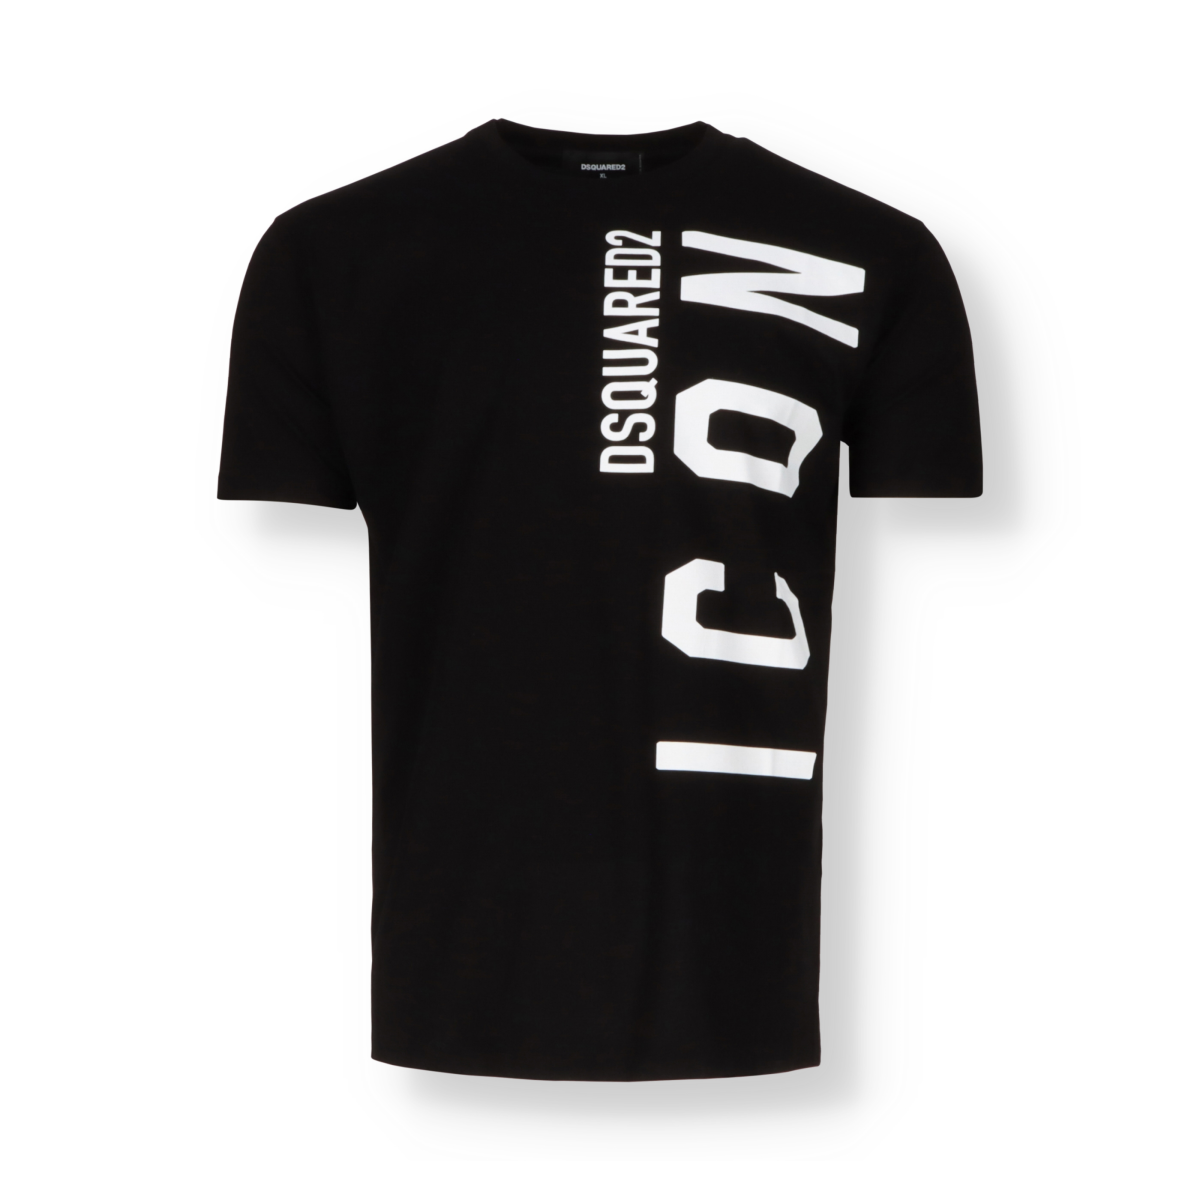 Dsquared2 ICON T-shirt